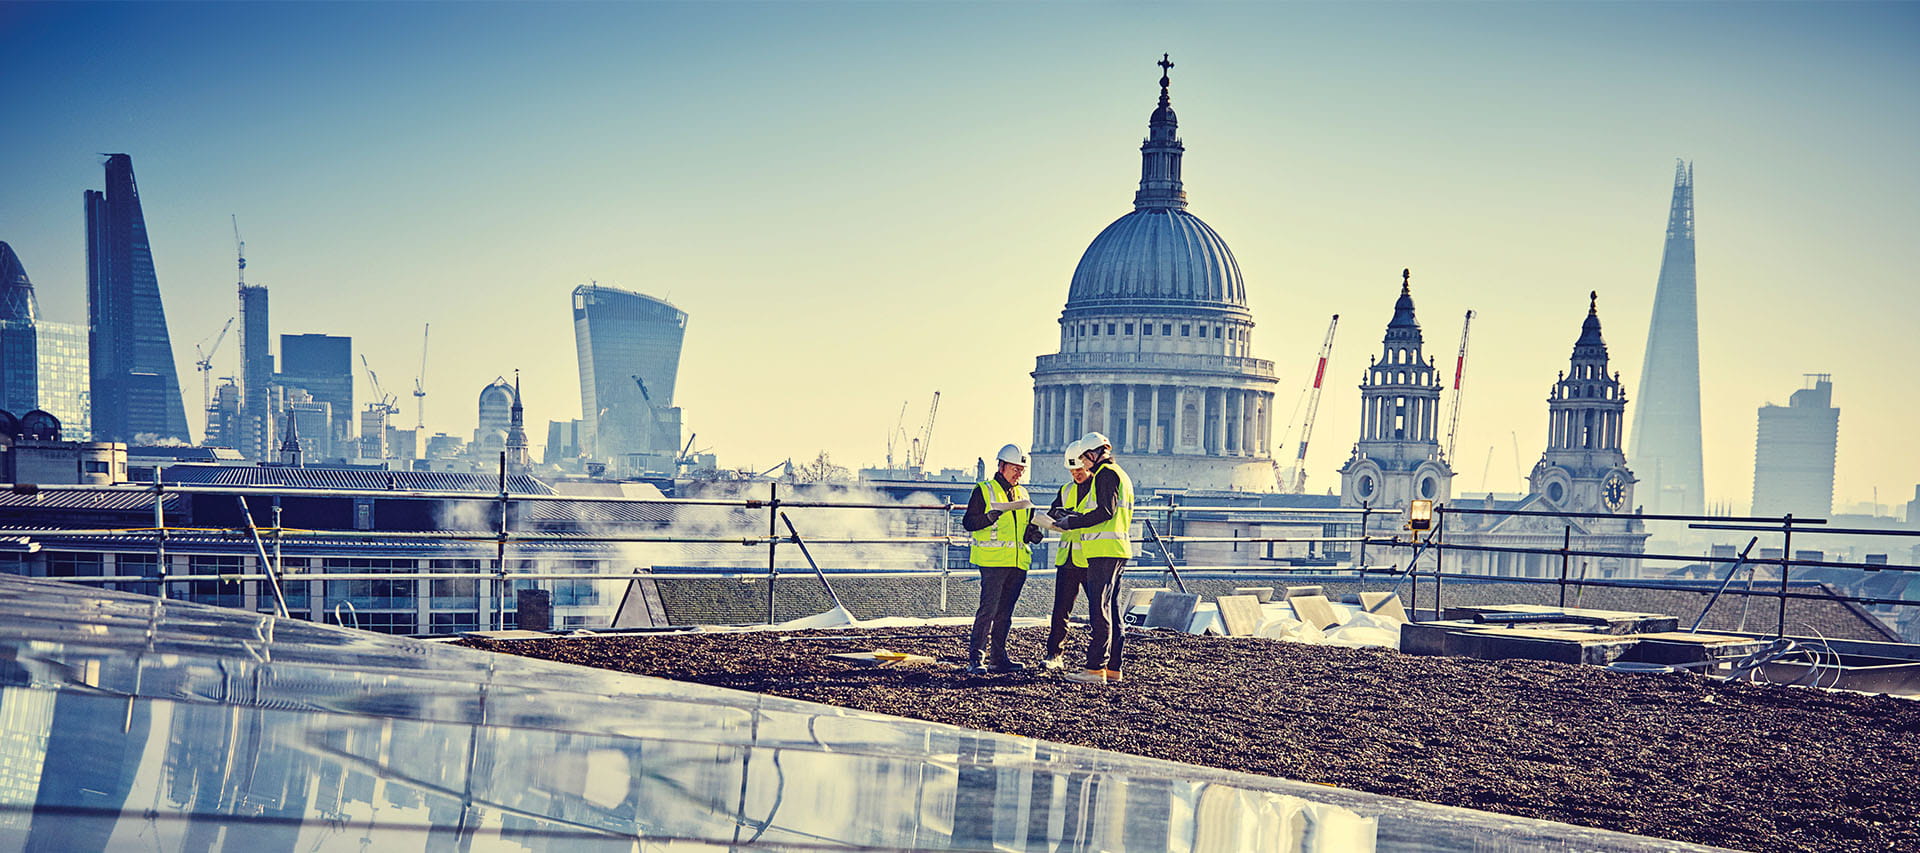 ISG construction workers looking at plans on rooftop site opposite St Paul's cathedral London